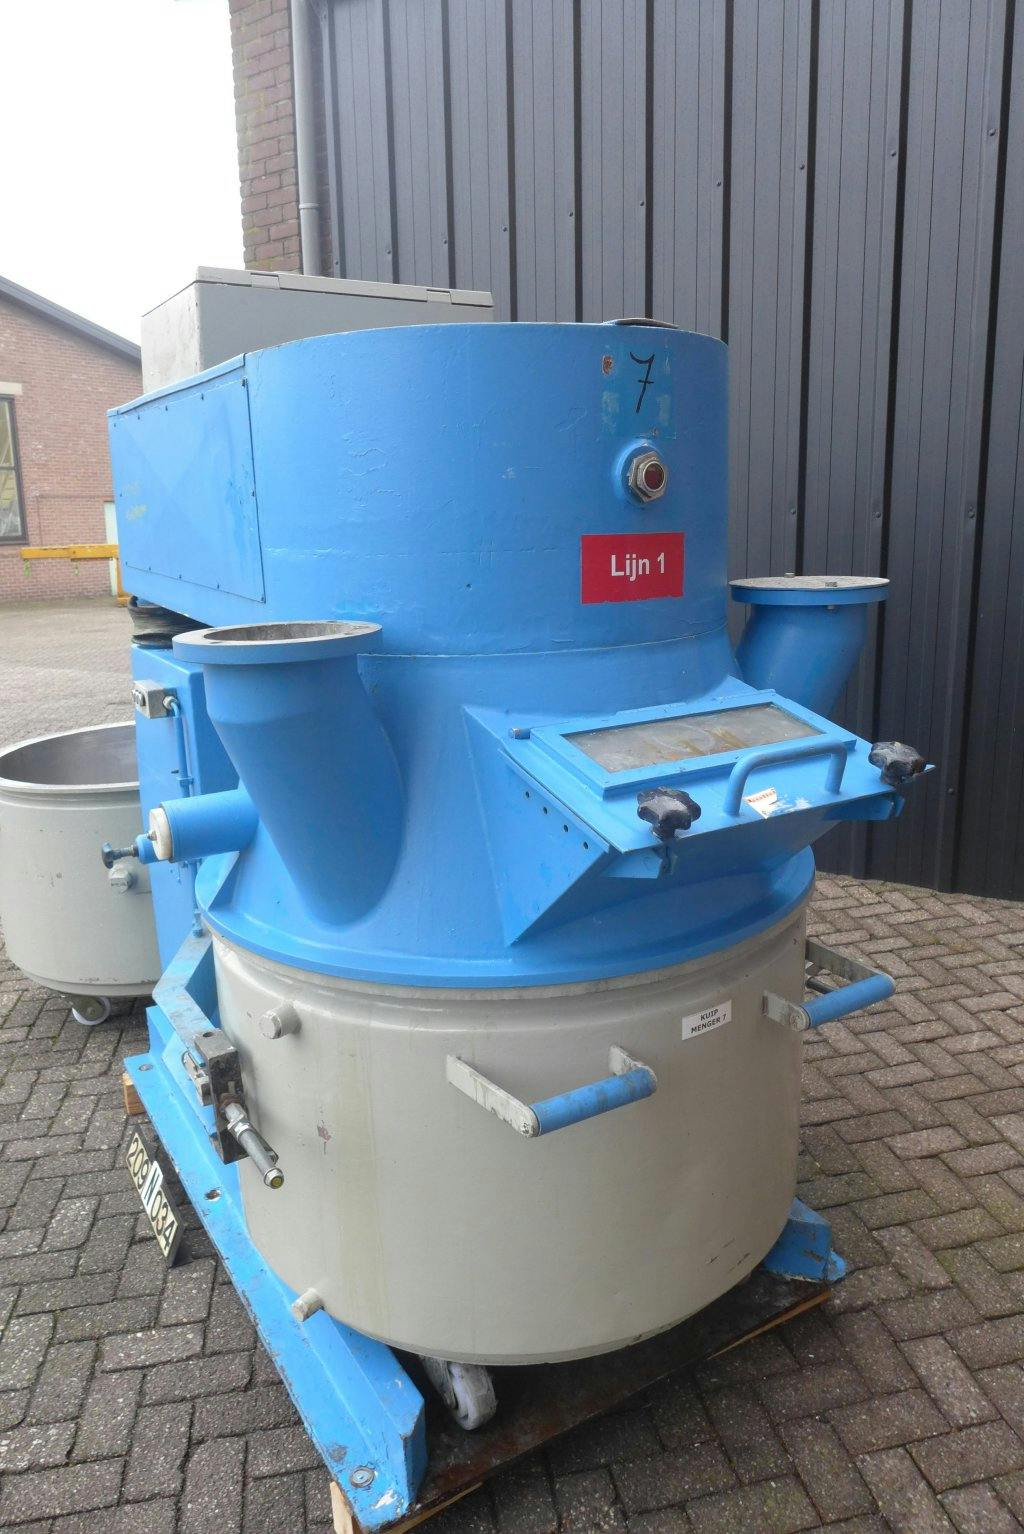 Grieser PL 600 - Planetary mixer - image 3